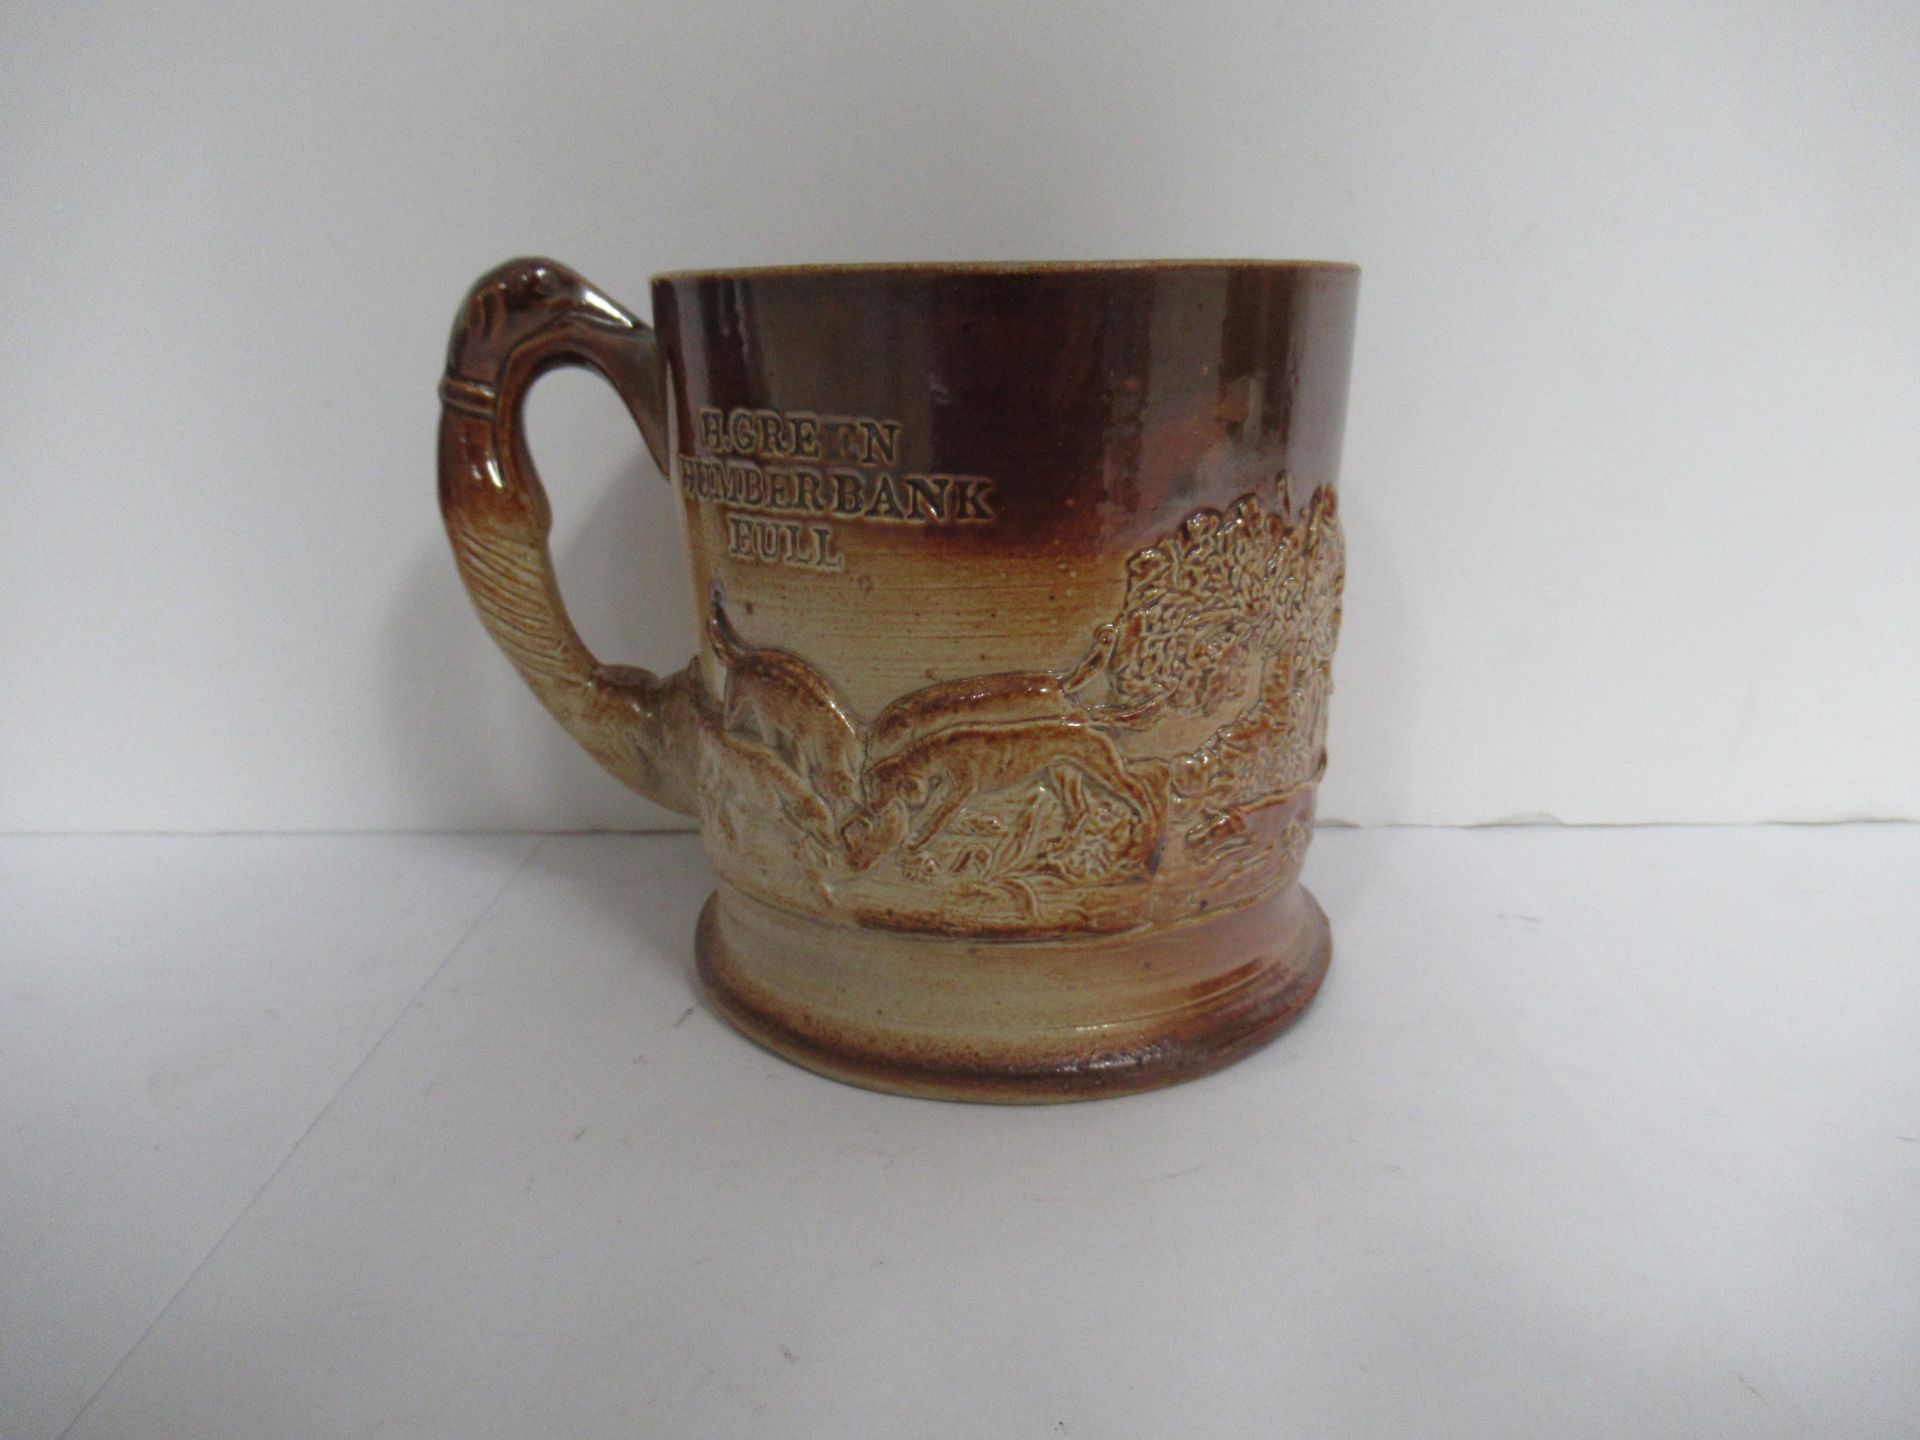 H.Green Humber Bank, Hull stone drinking vessel with greyhound handle - Image 3 of 7